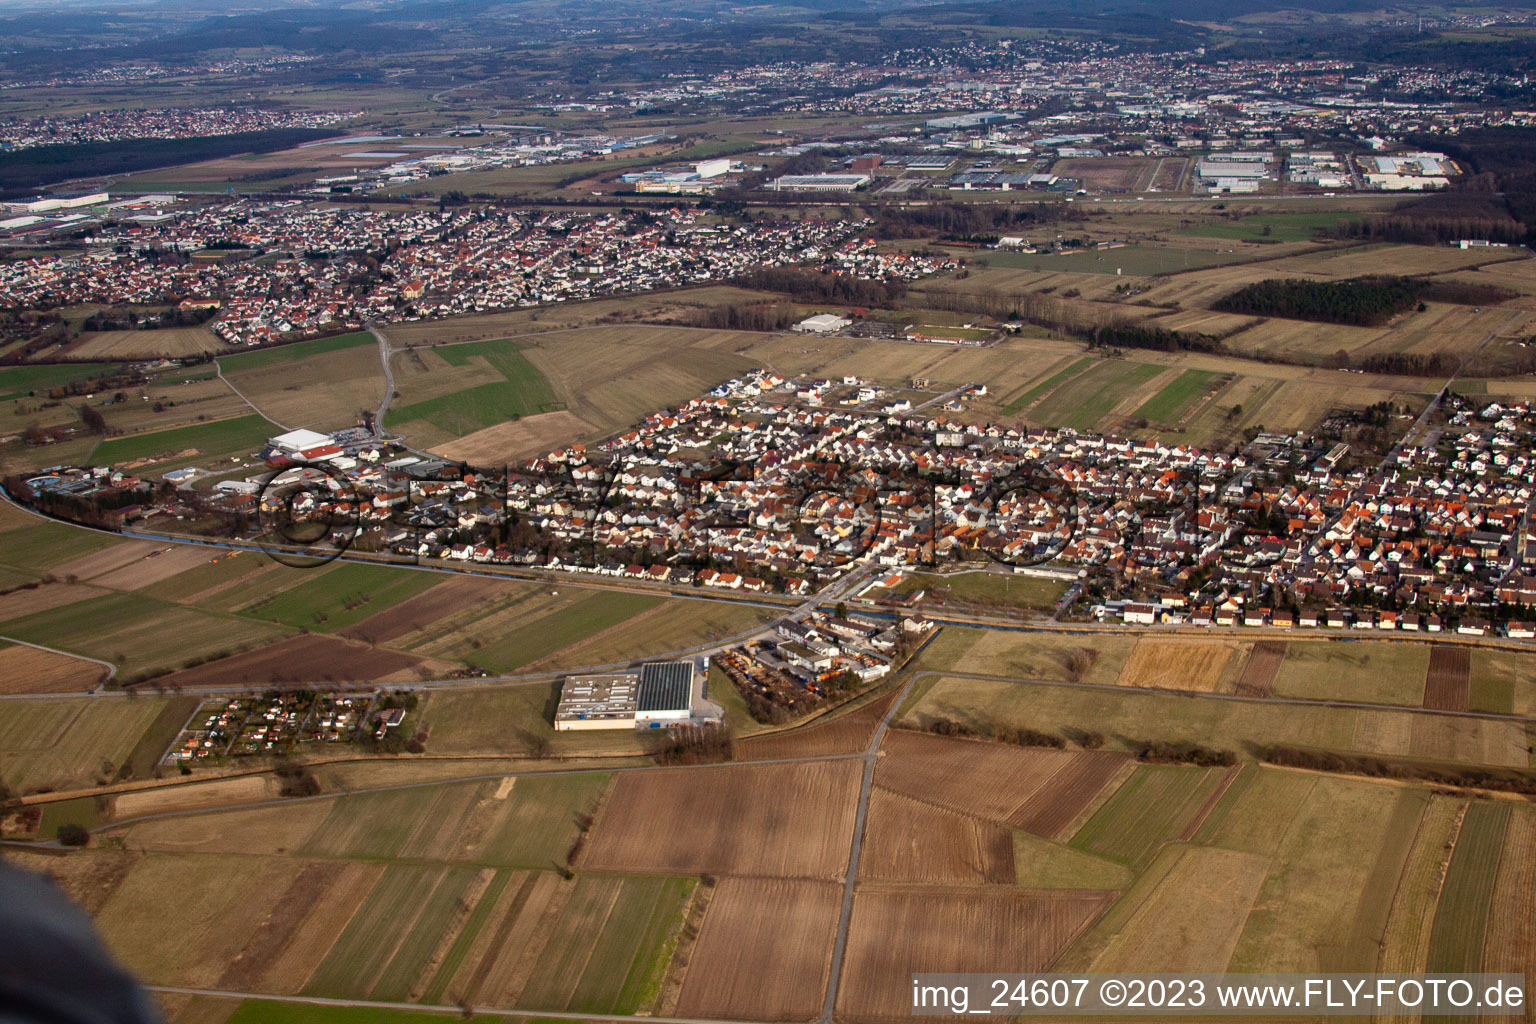 District Neuthard in Karlsdorf-Neuthard in the state Baden-Wuerttemberg, Germany seen from above